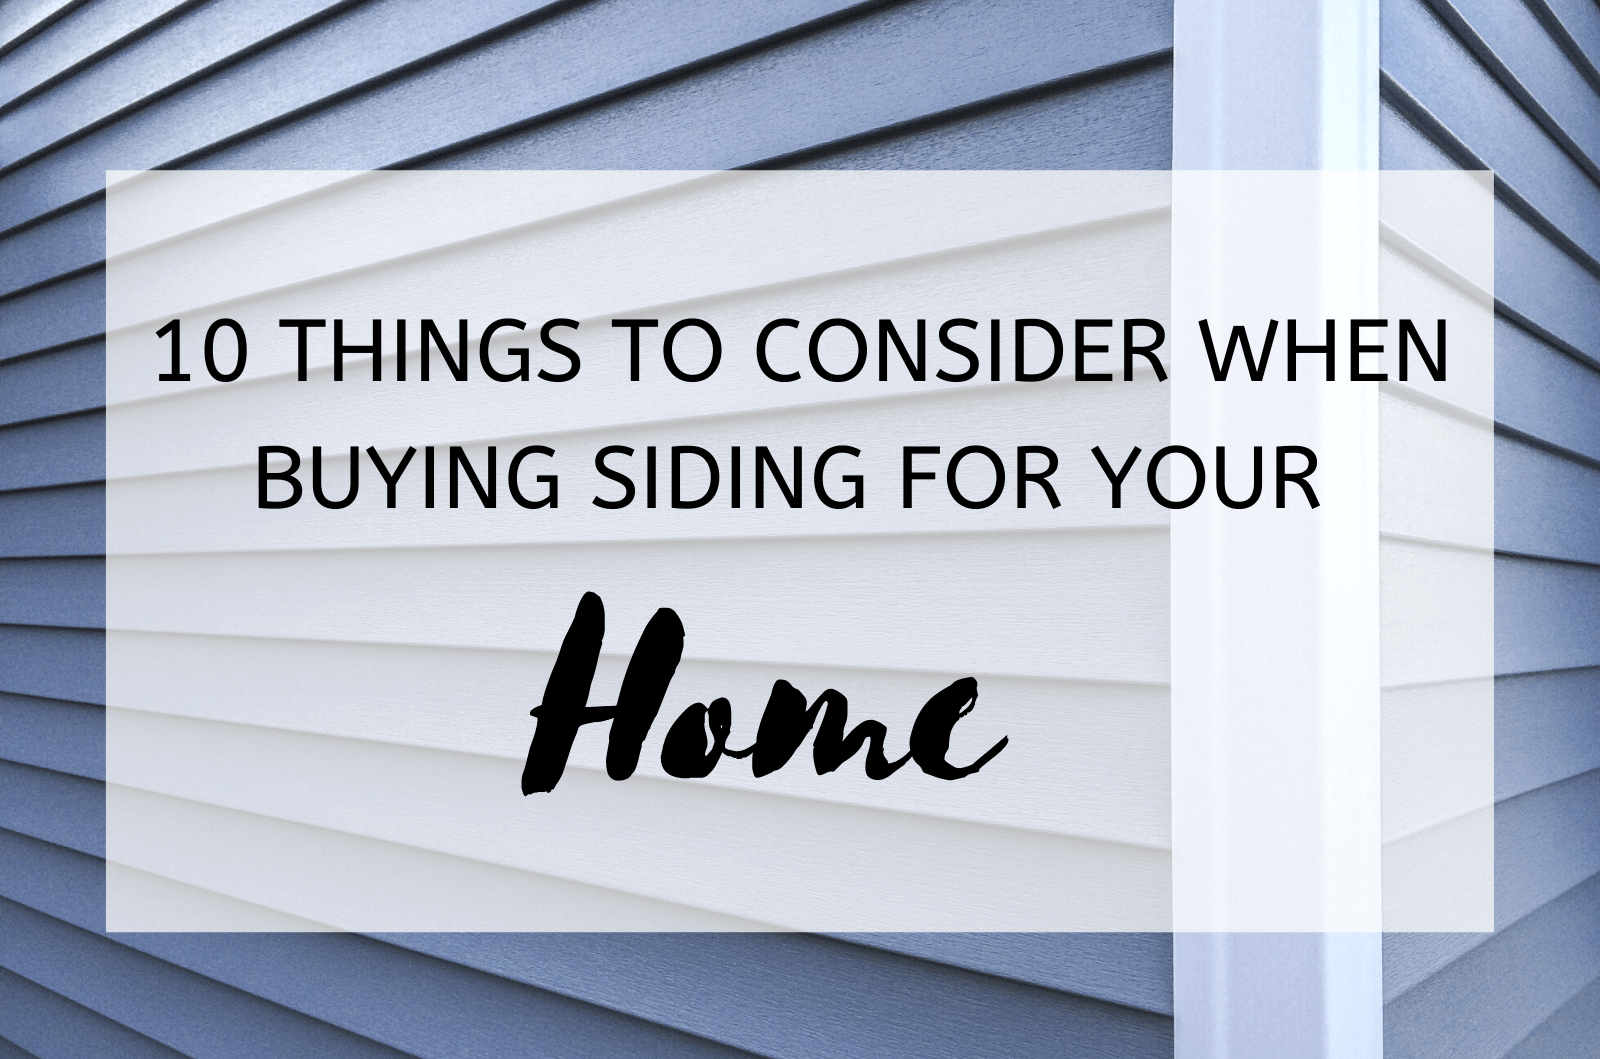 10 Things To Consider When Buying Siding For Your Home